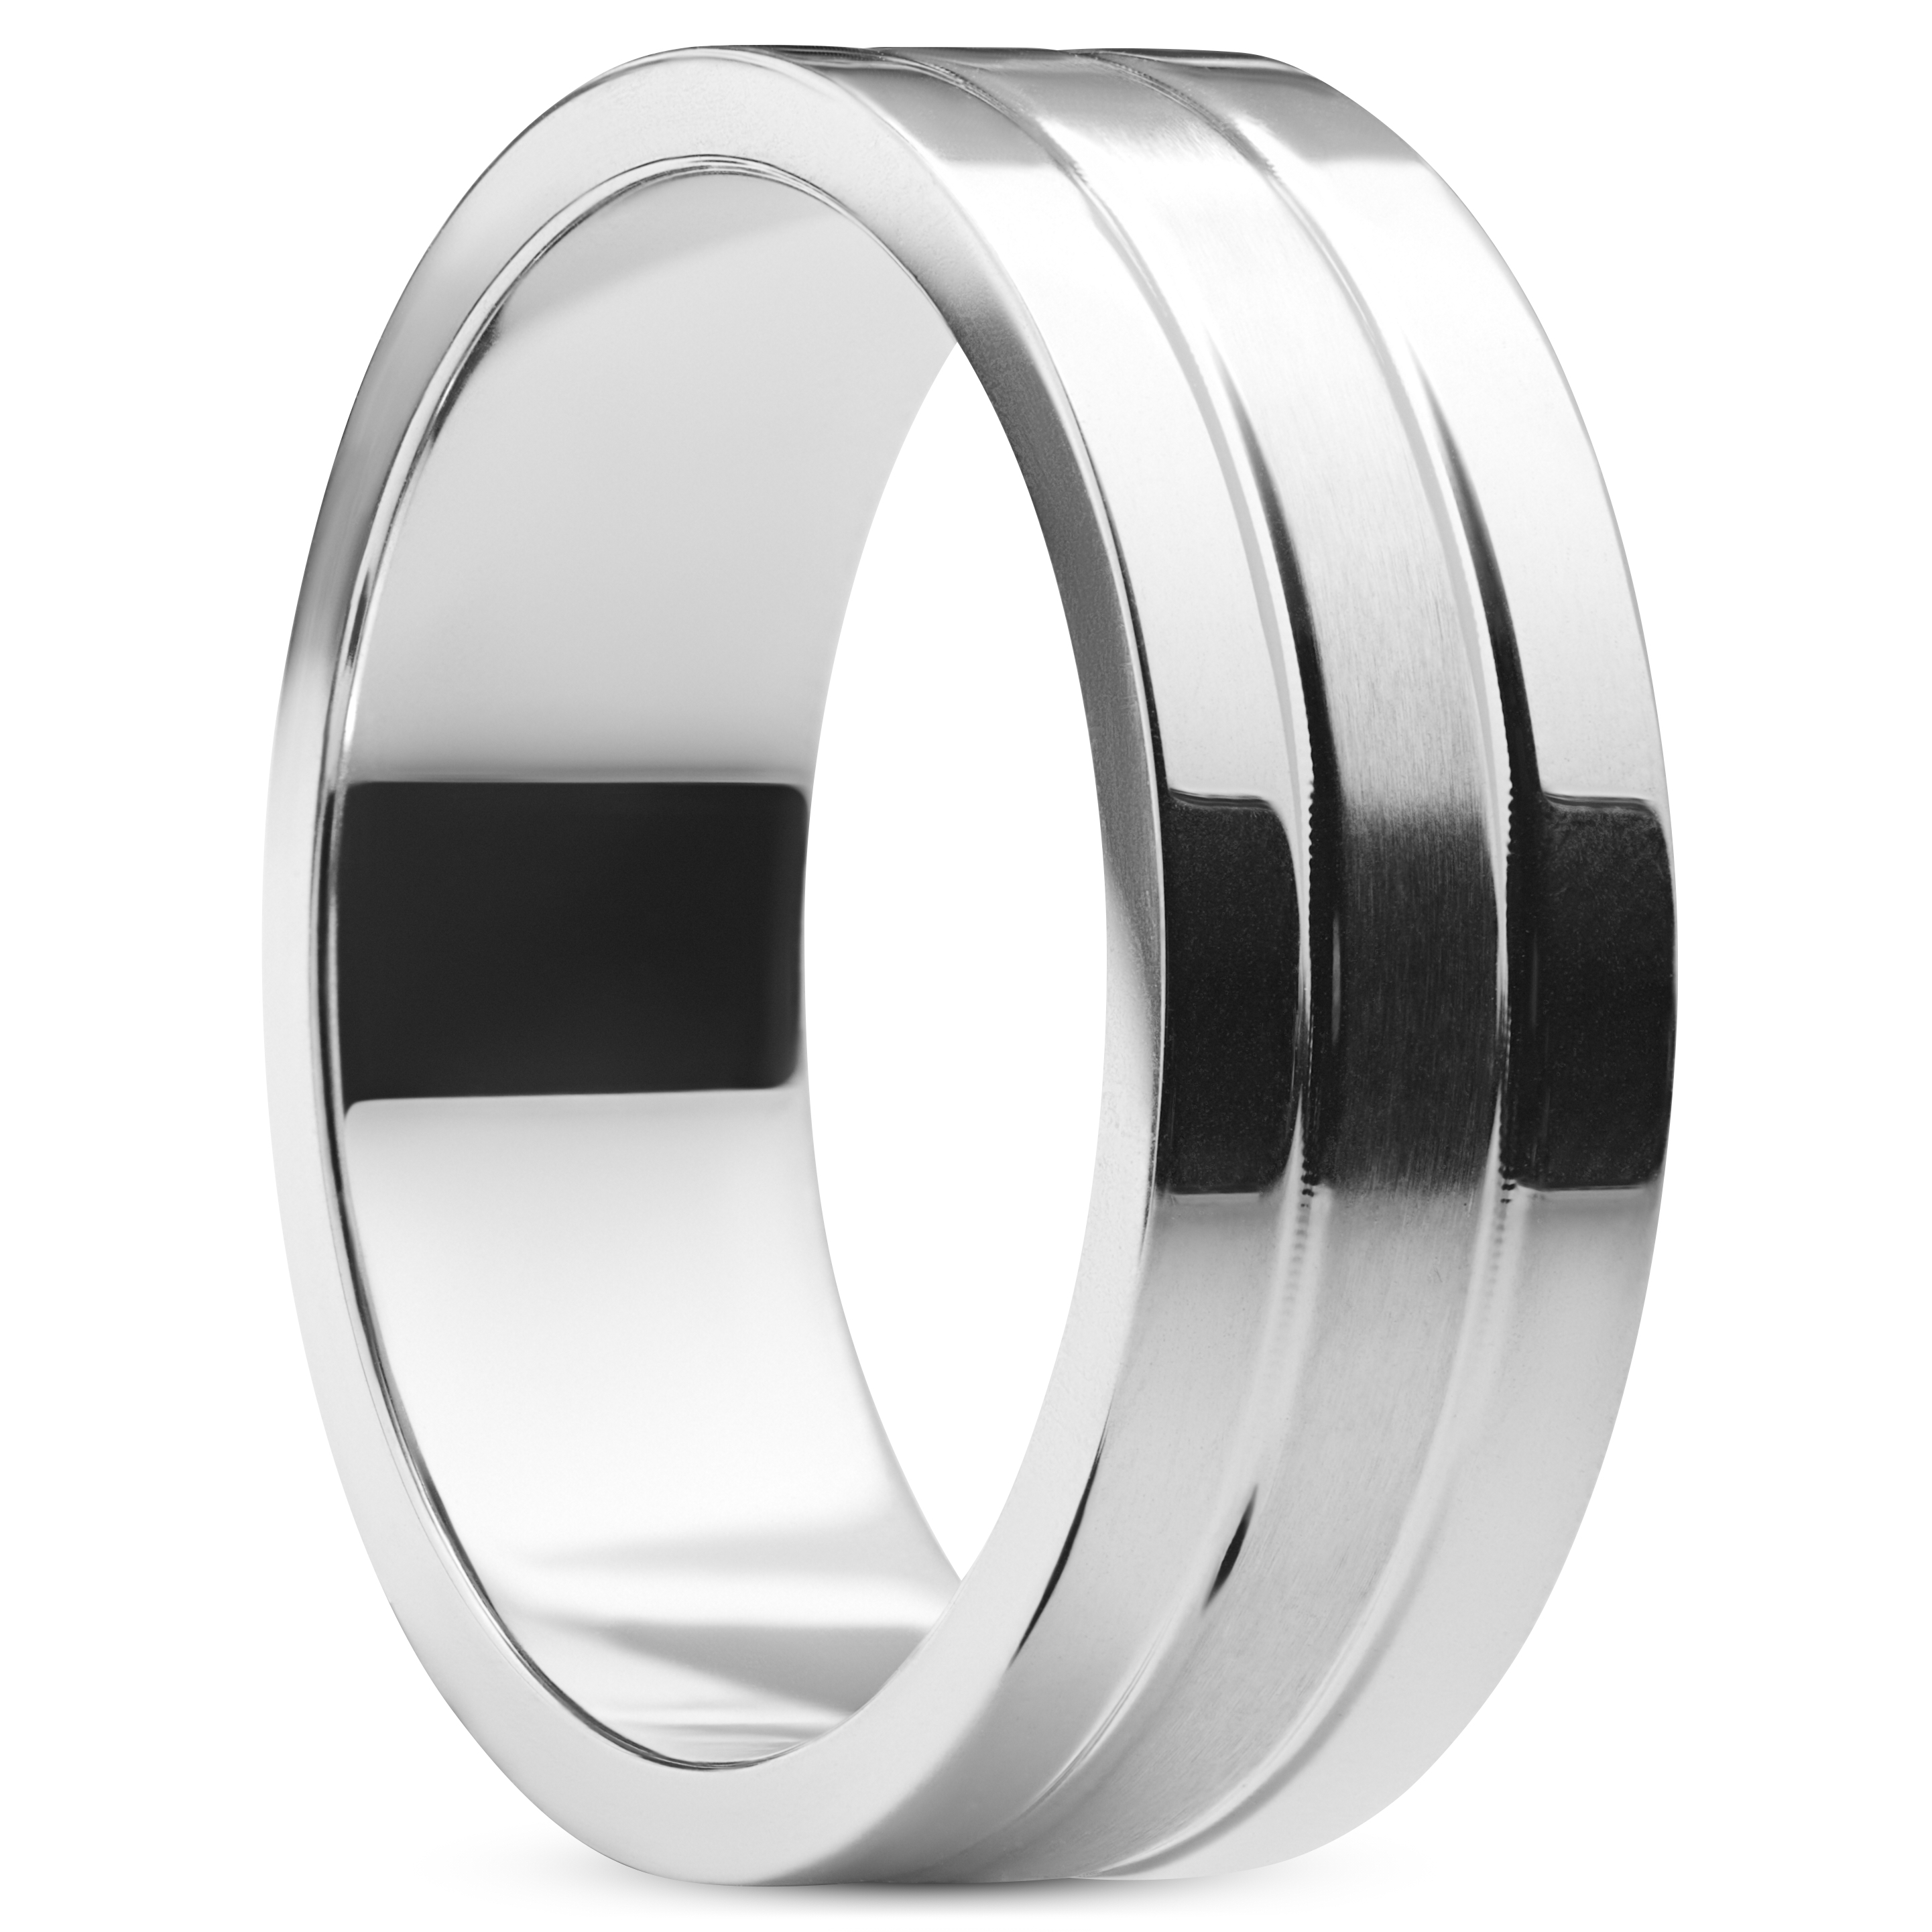 Buy KRYSTALZ Twil Horizontal Stainless Steel Textured Band Rings for Men  and Boy's (Pack Of 1 Piece) (BLUE, 17) at Amazon.in